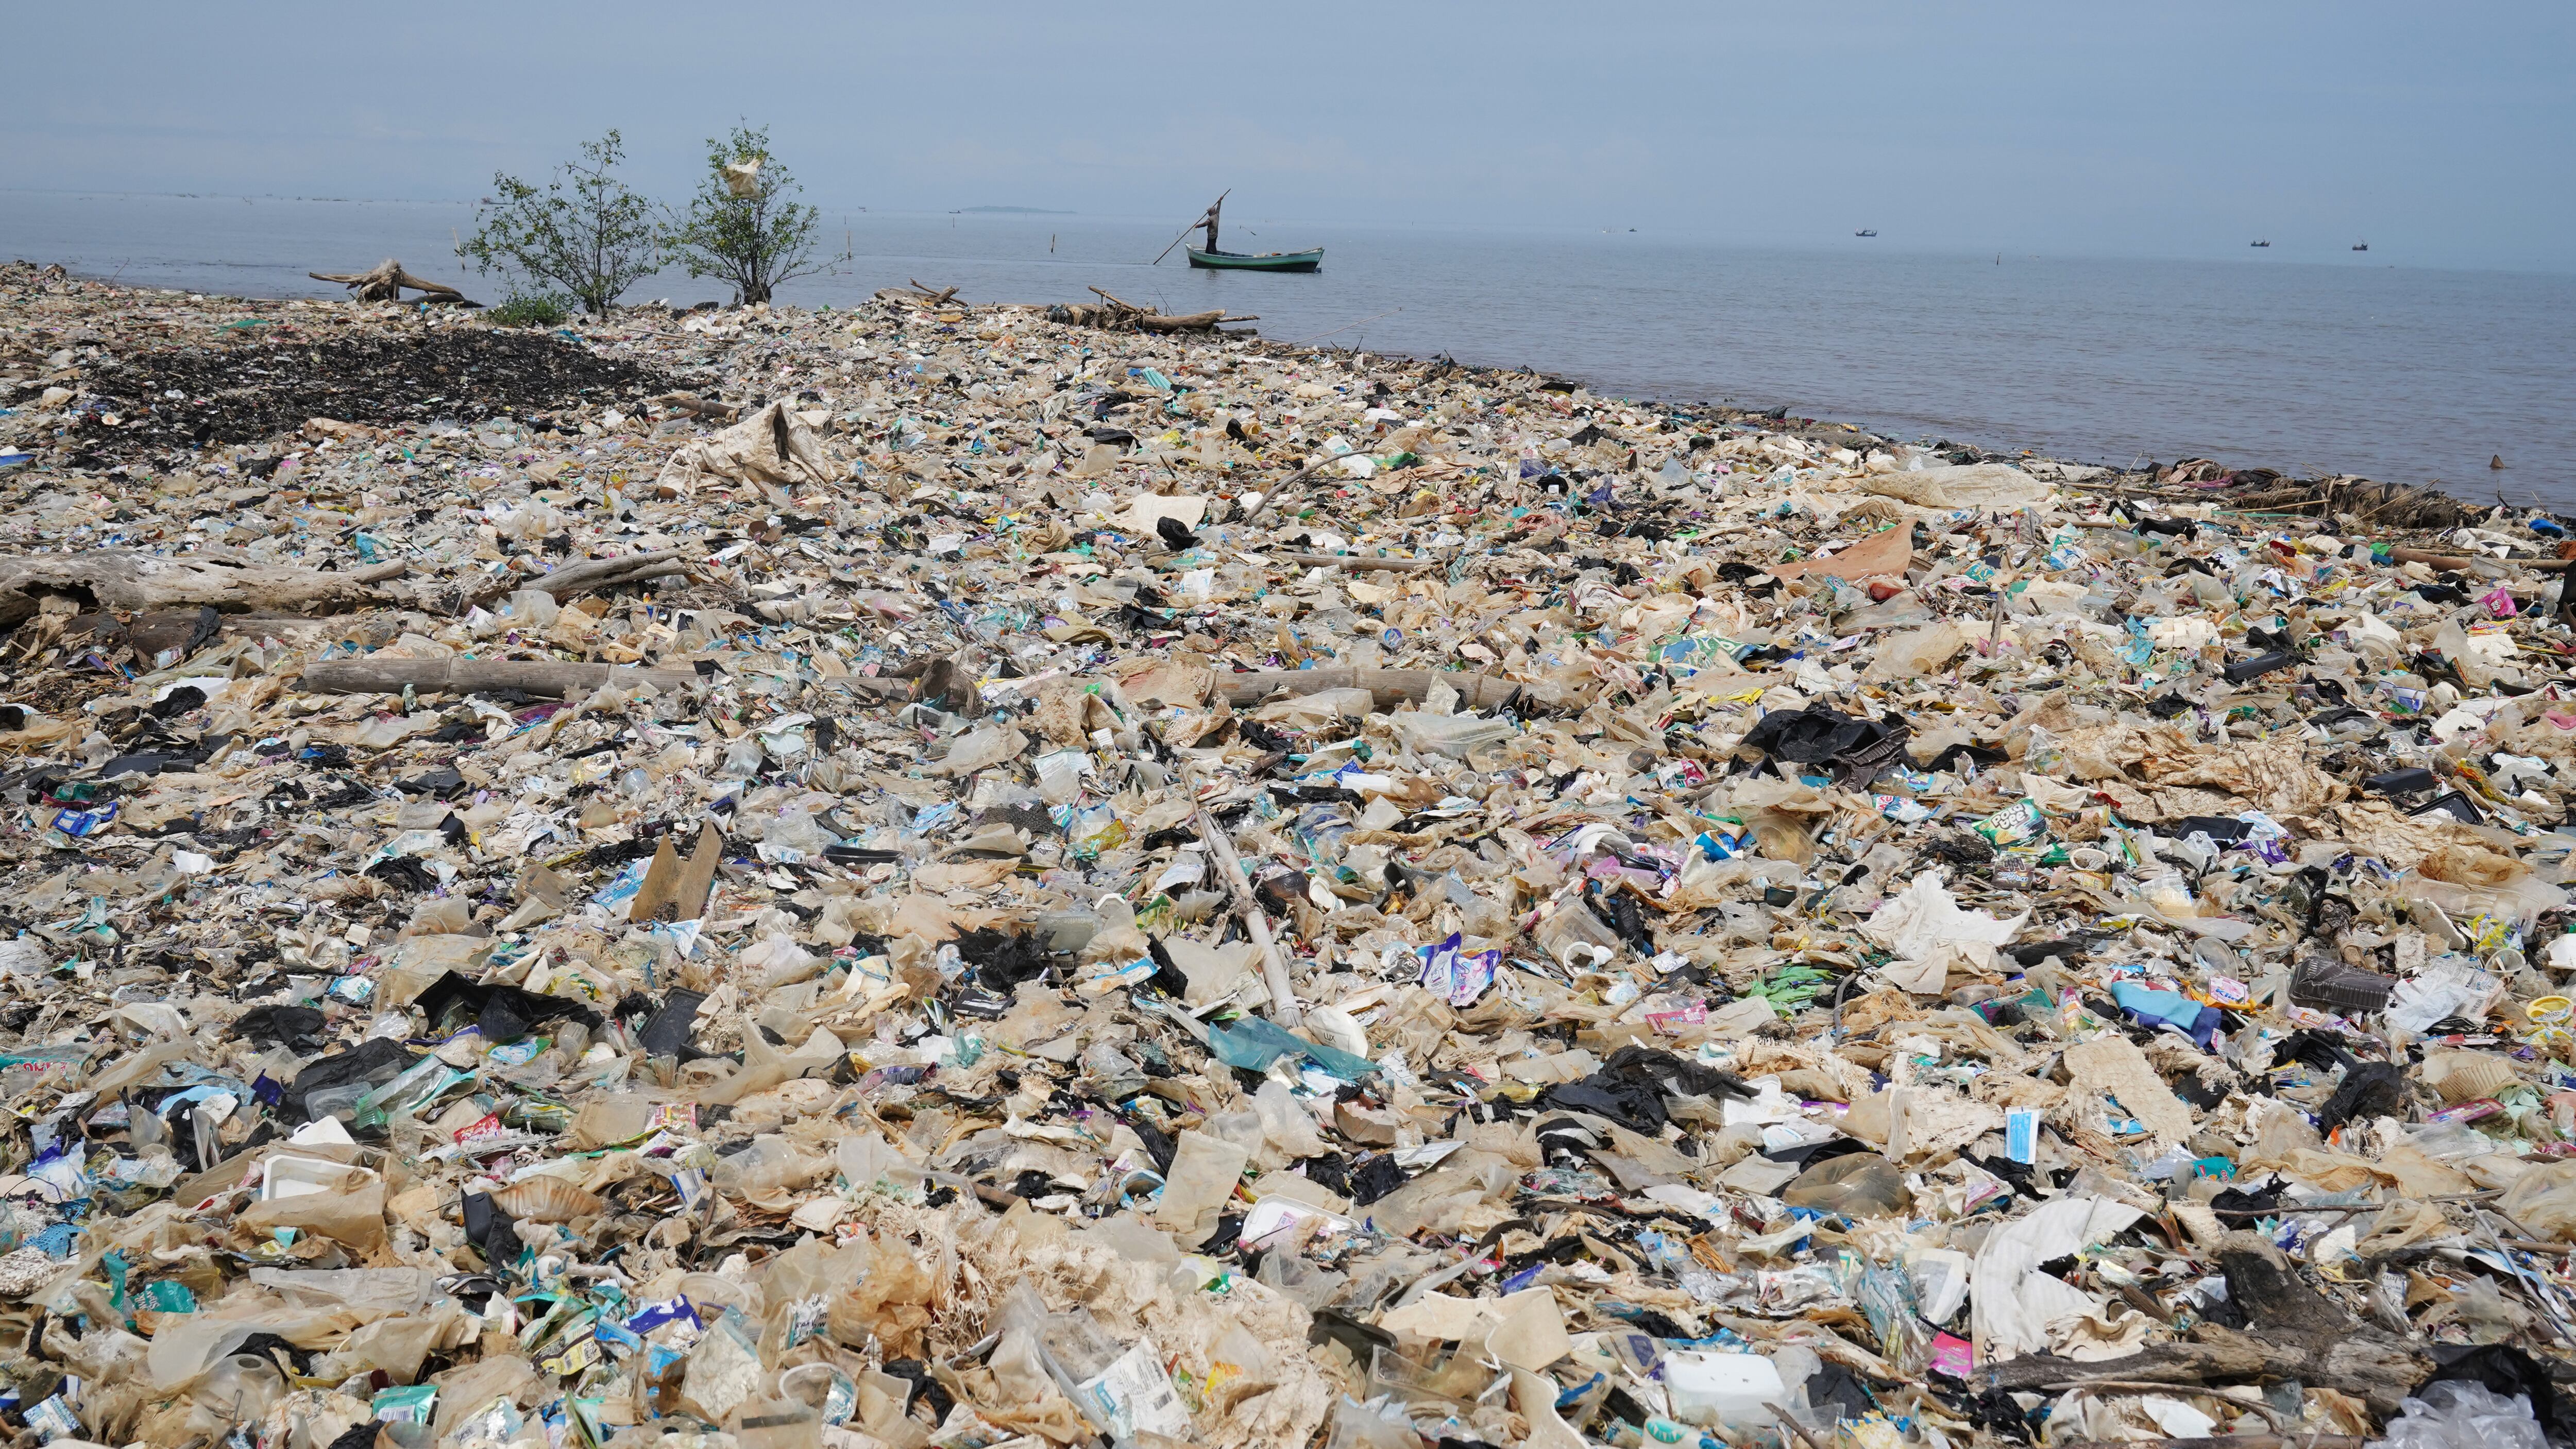 Plastic left to float in seawater turns it cloudy, a study suggests